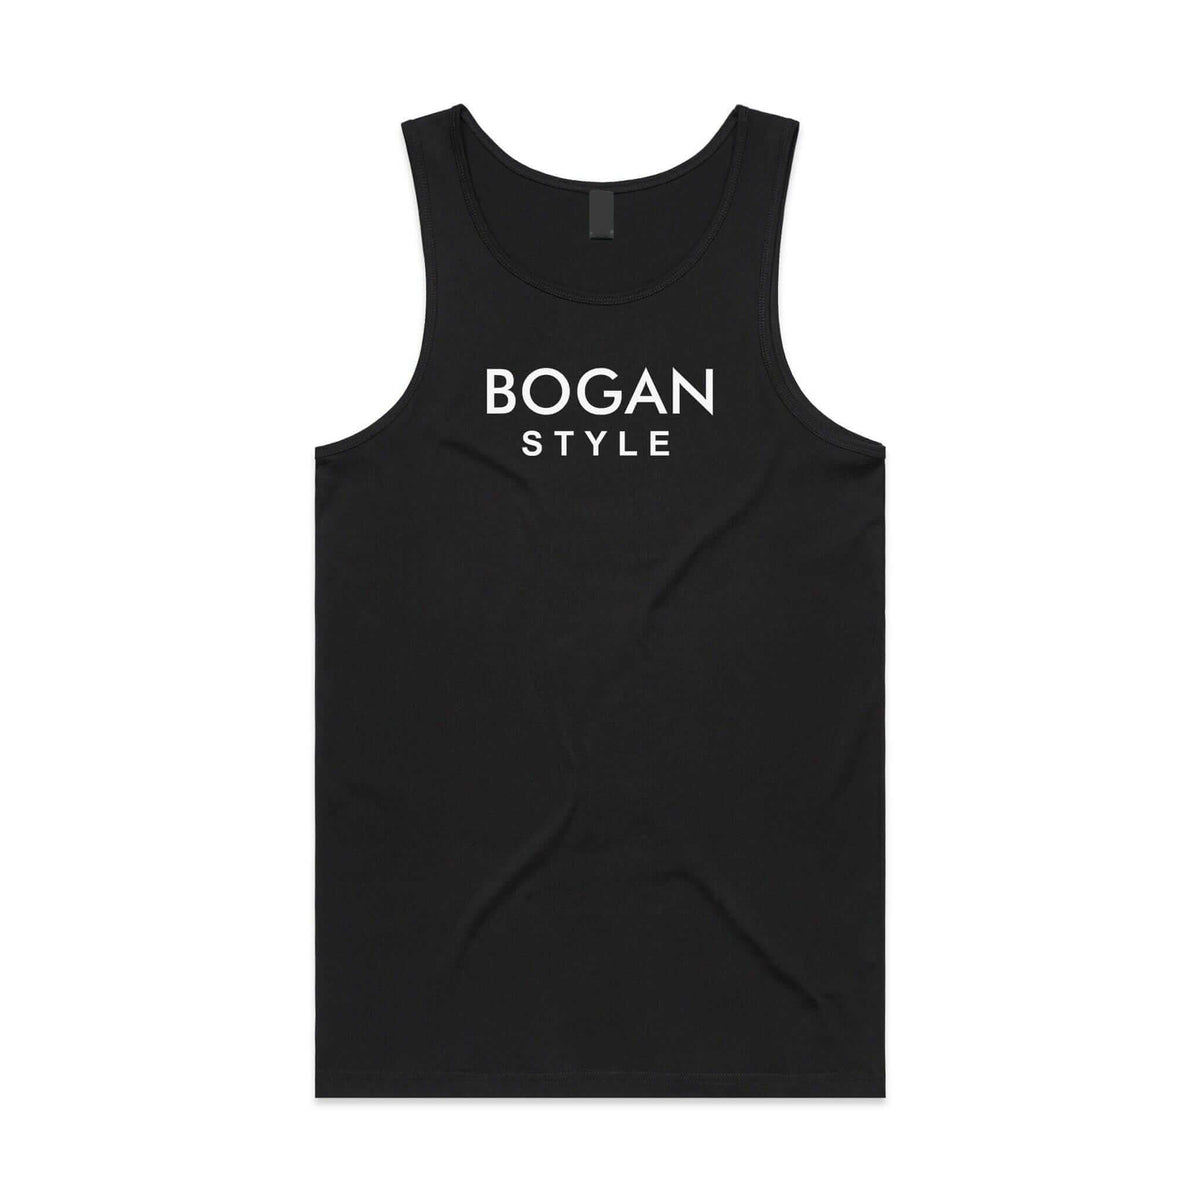 Men's black tank top with Bogan Style printed in white letters